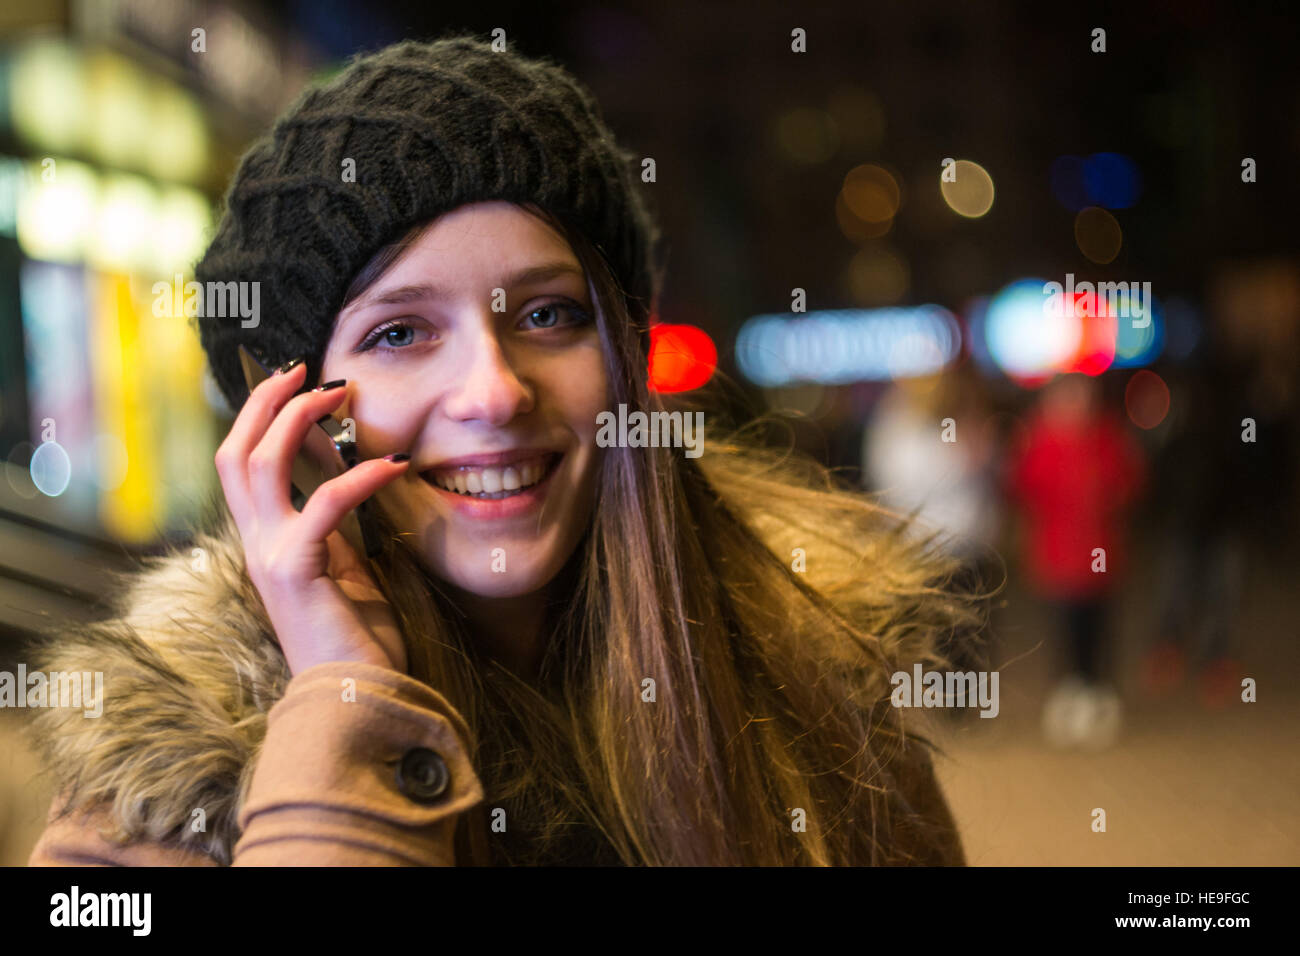 Young happy woman in hat and coat talking on mobile phone smiling looking at camera against night city lights in winter Stock Photo